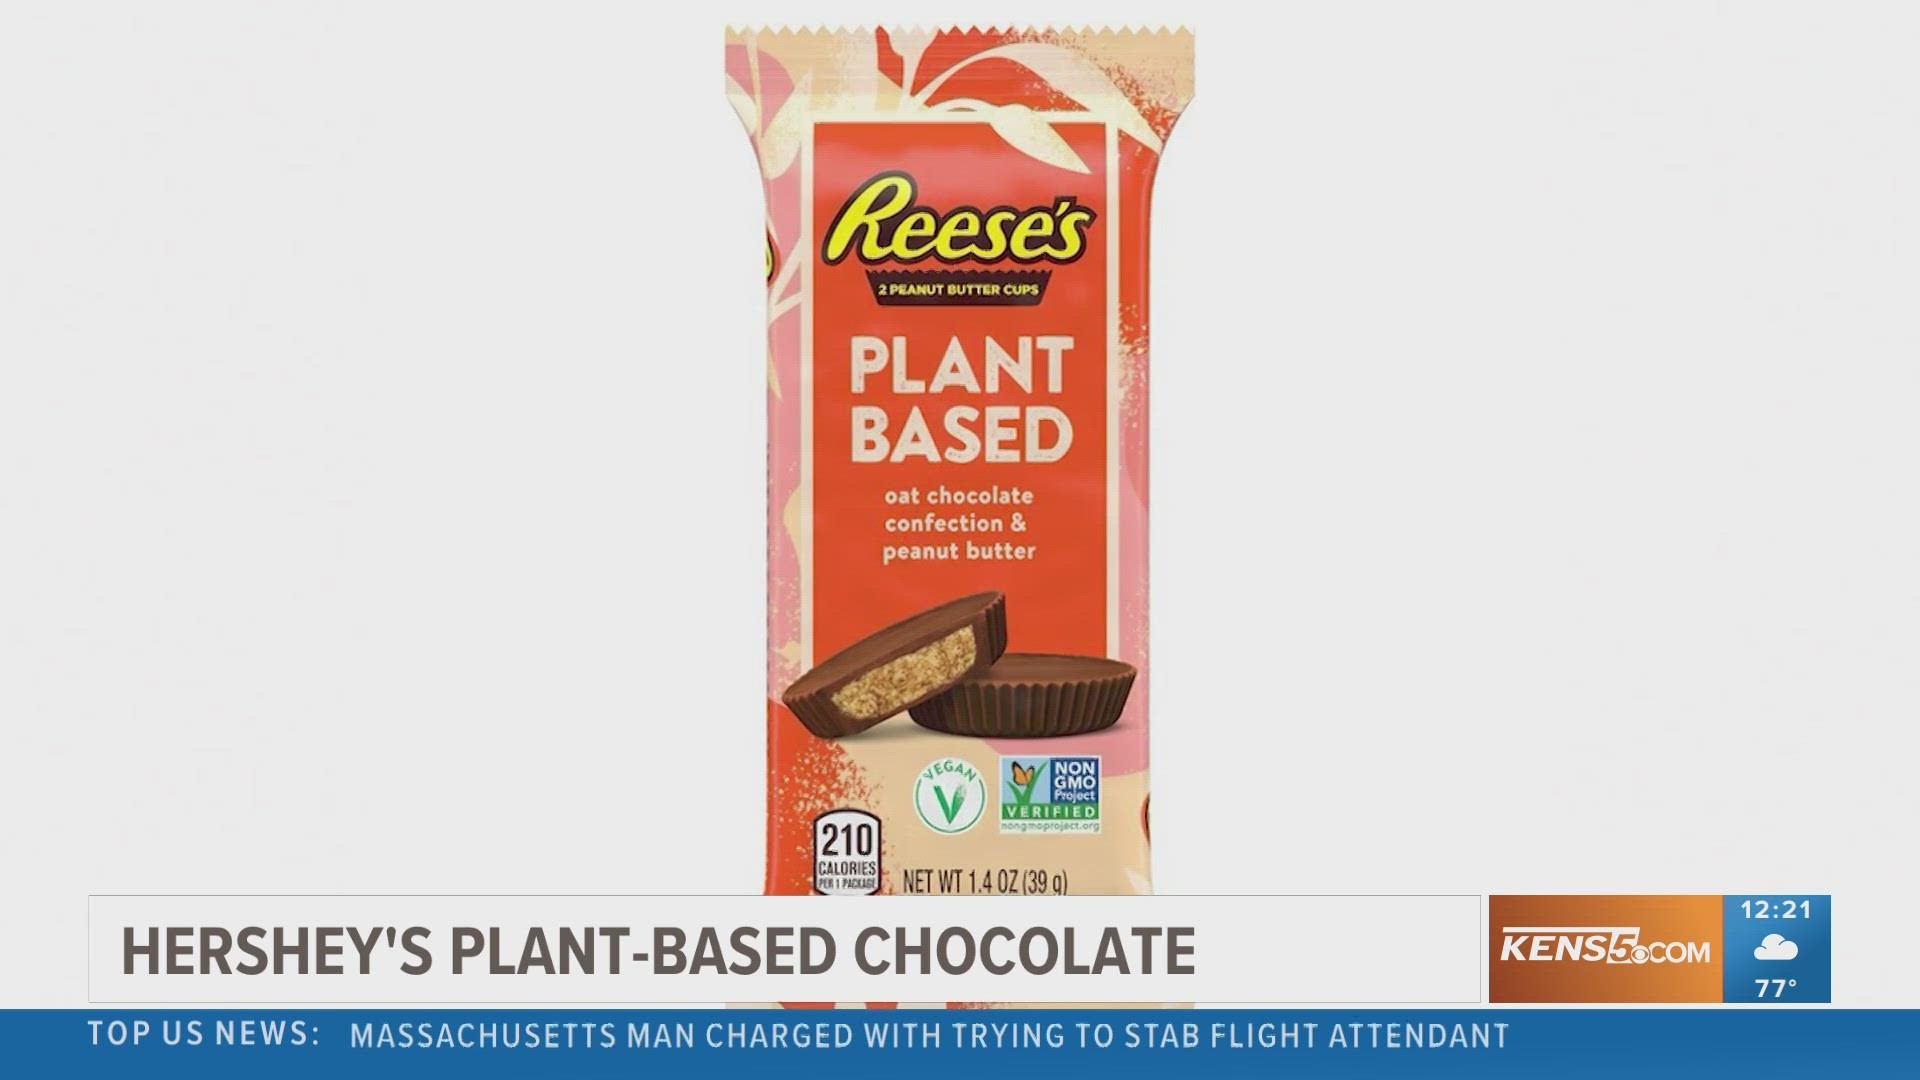 The company is also making a second plant-based option, extra creamy chocolate with almonds and sea salt. The chocolates are made with oats instead of milk.